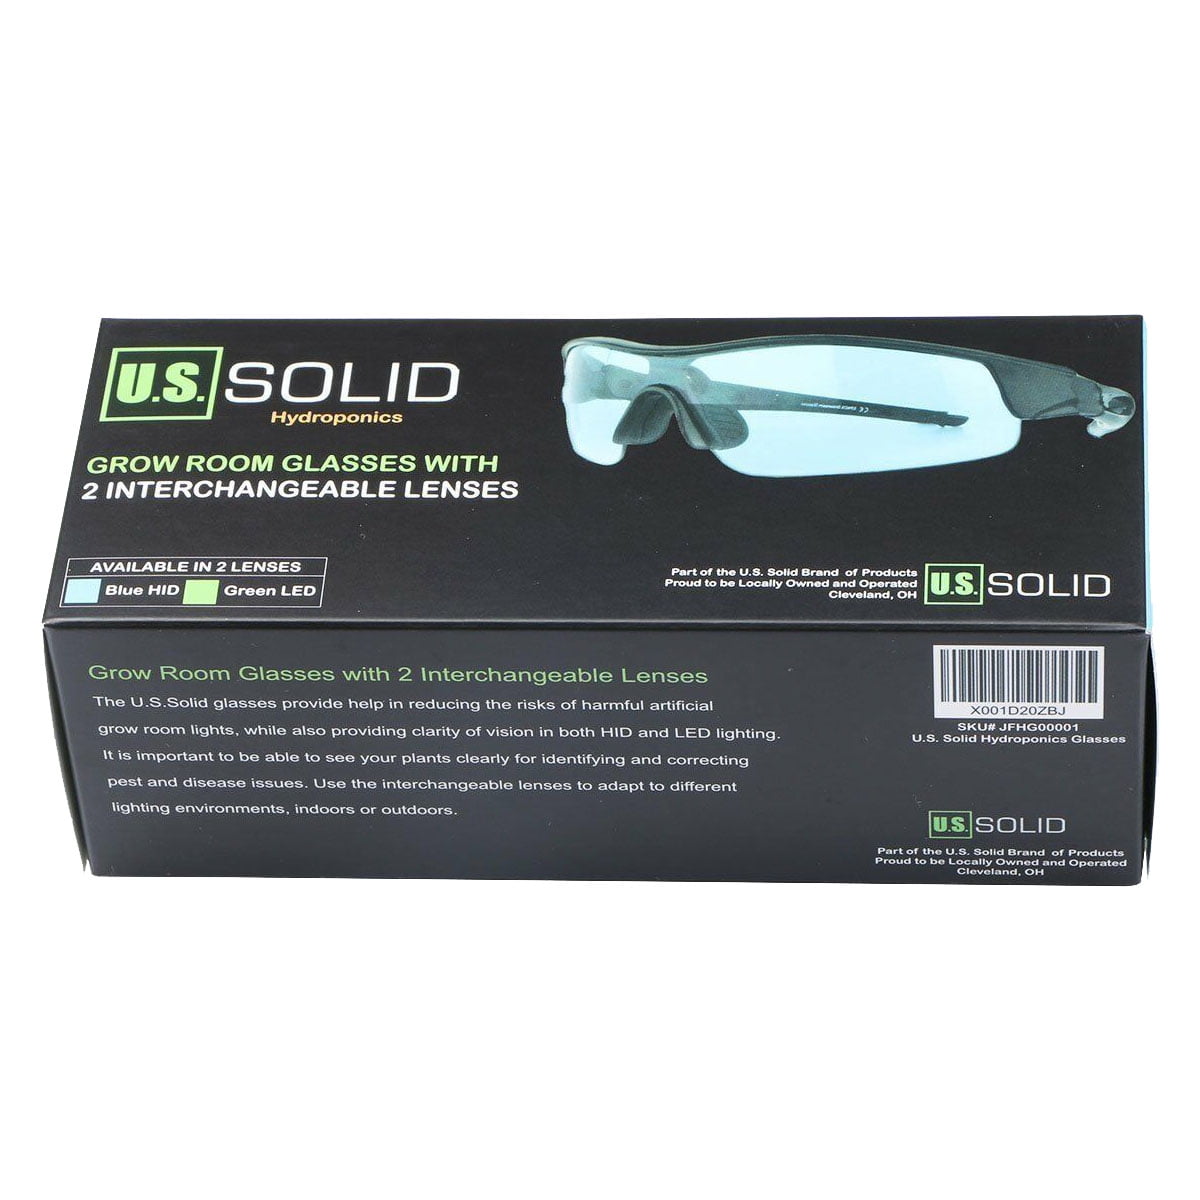 Grow Room Glasses Hydroponics 2 Sets of Lenses for HID&LED Lighting by U.S.Solid 